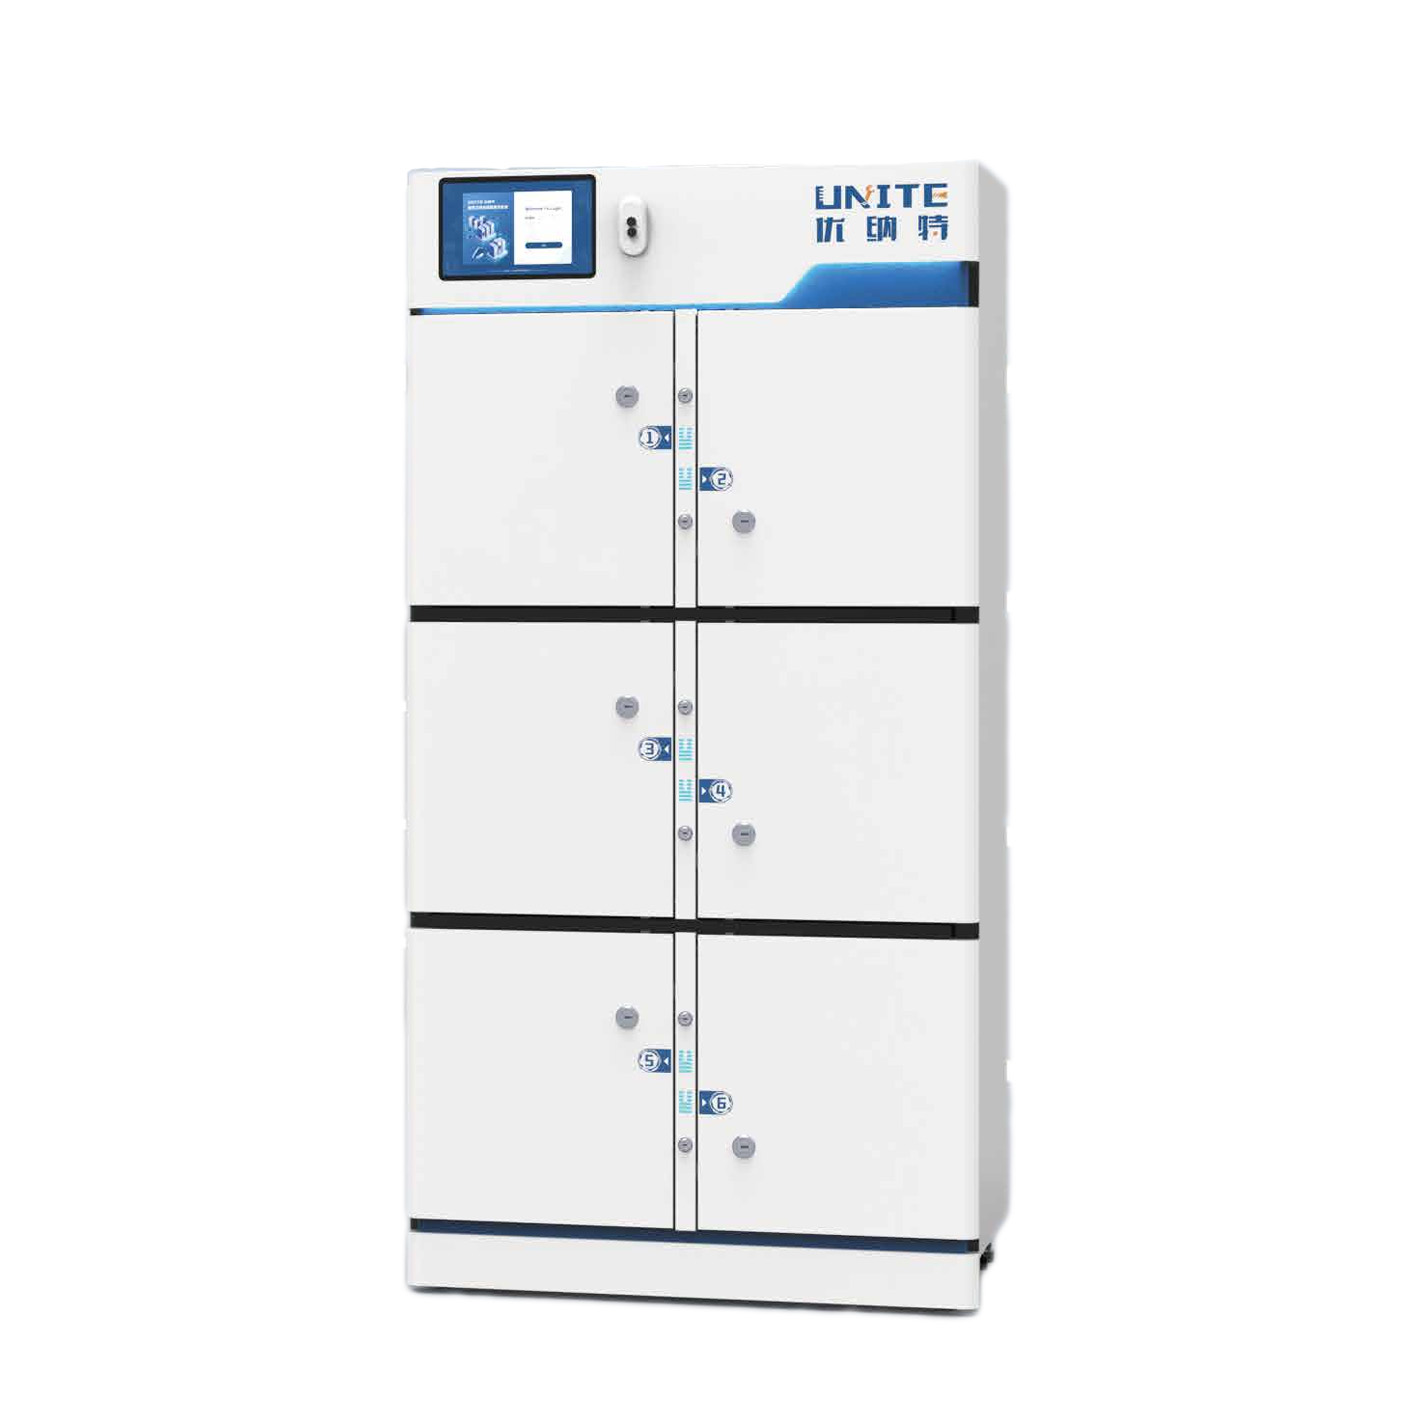 Unite Usample R6.2 Six-zone Matrix IOT Cabinets For Hazardous Chemicals (RFID) with Partition Storage of 120+ Reagent Bottle